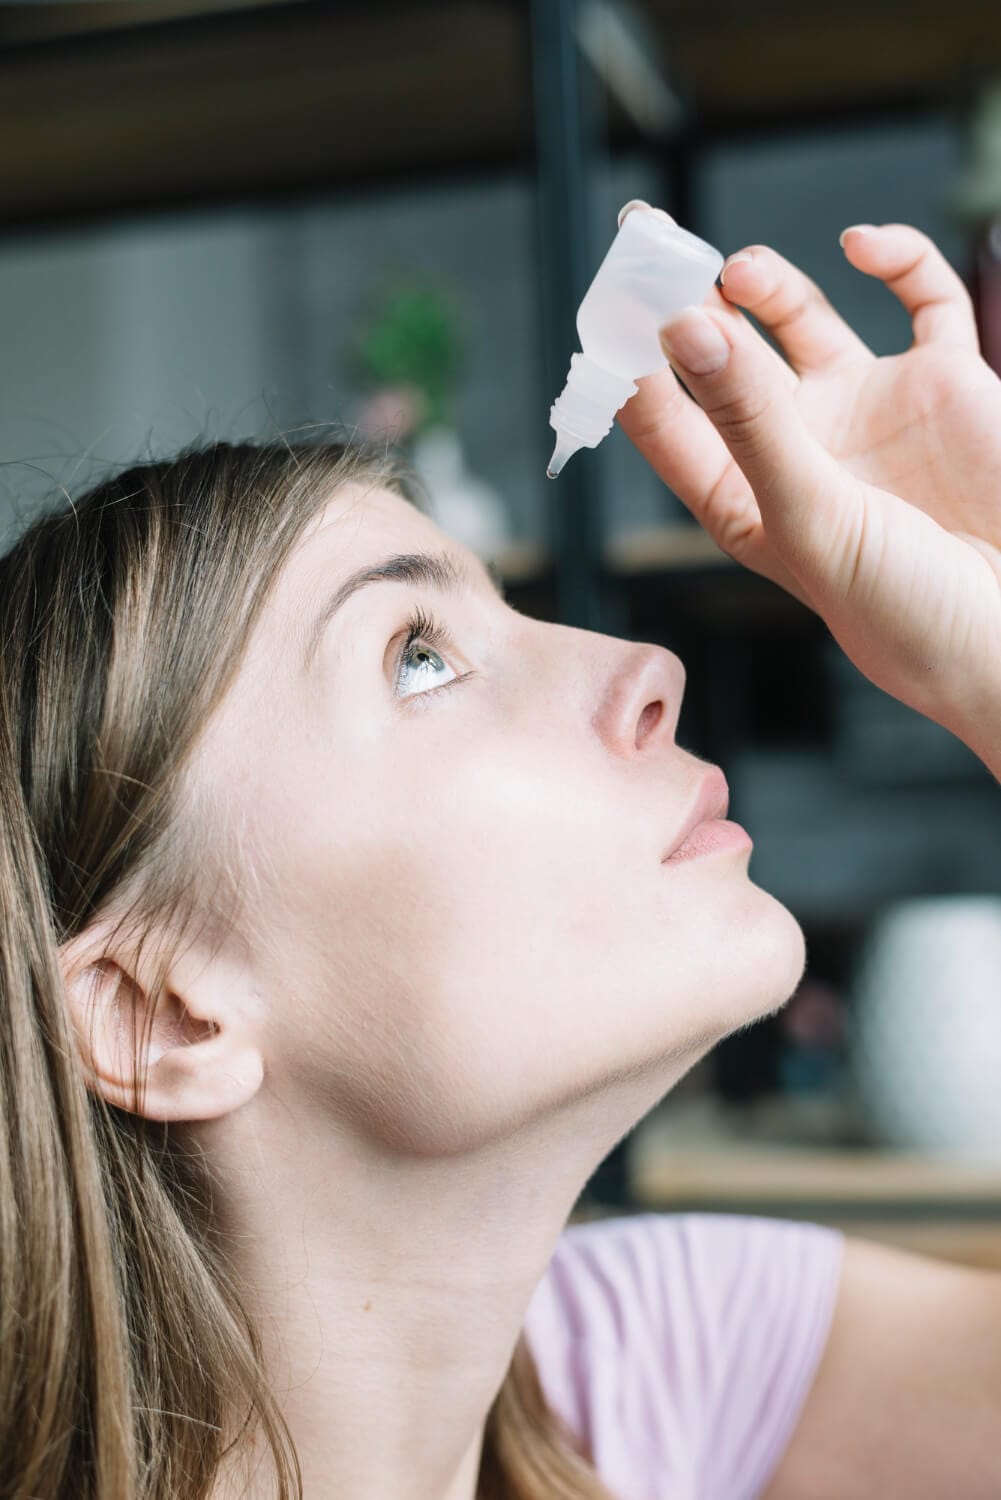 How Can Women Reduce Their Risk of Dry Eye?